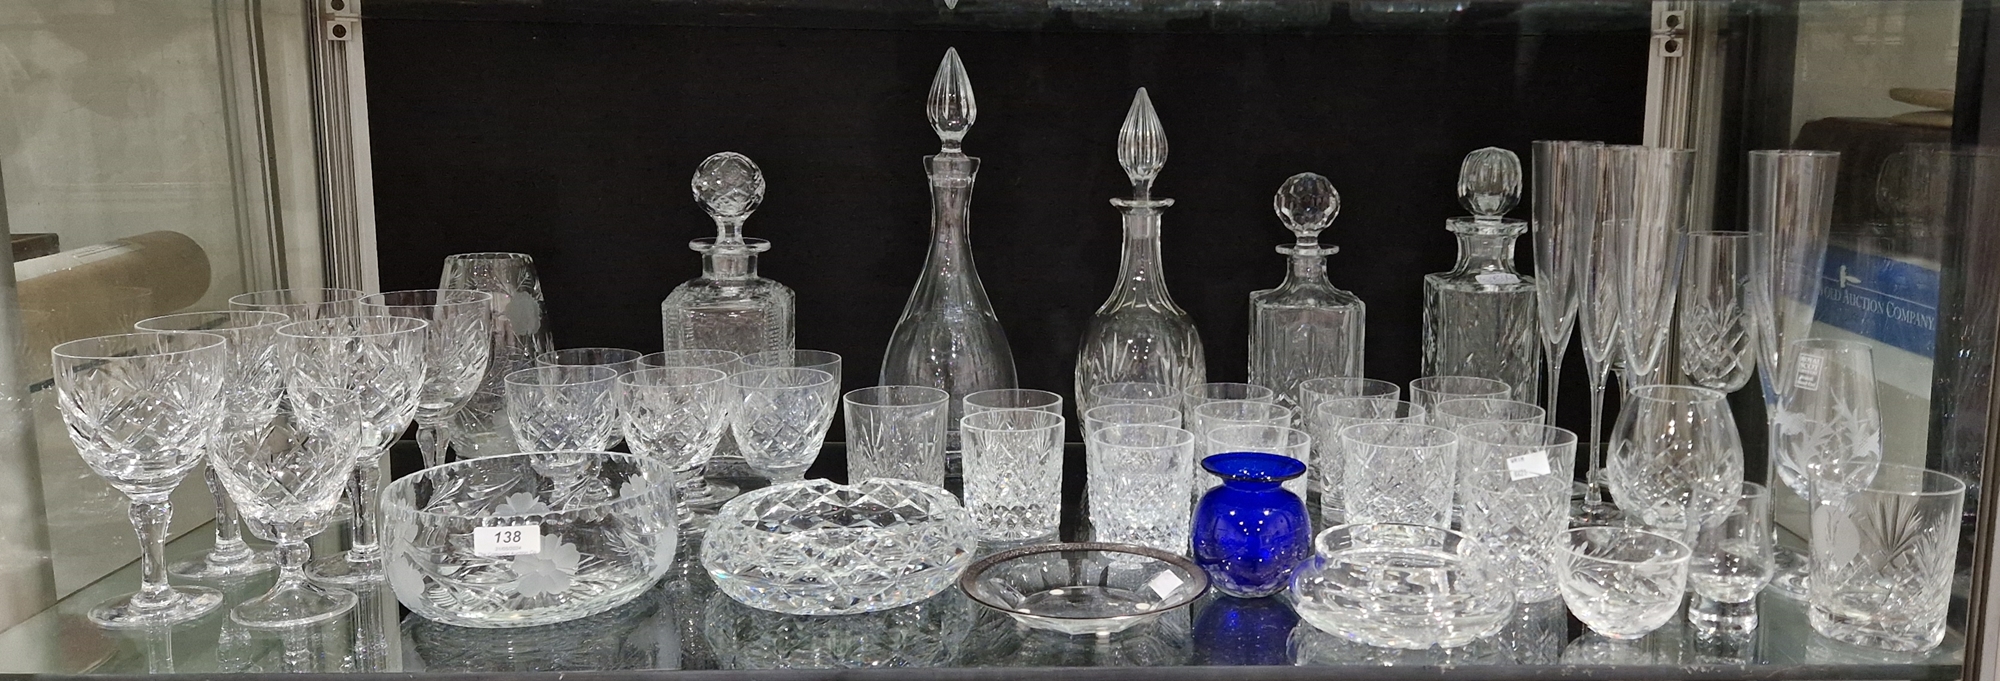 Large collection of cut glass including sets of water tumblers in sizes including Webb examples, - Image 2 of 3